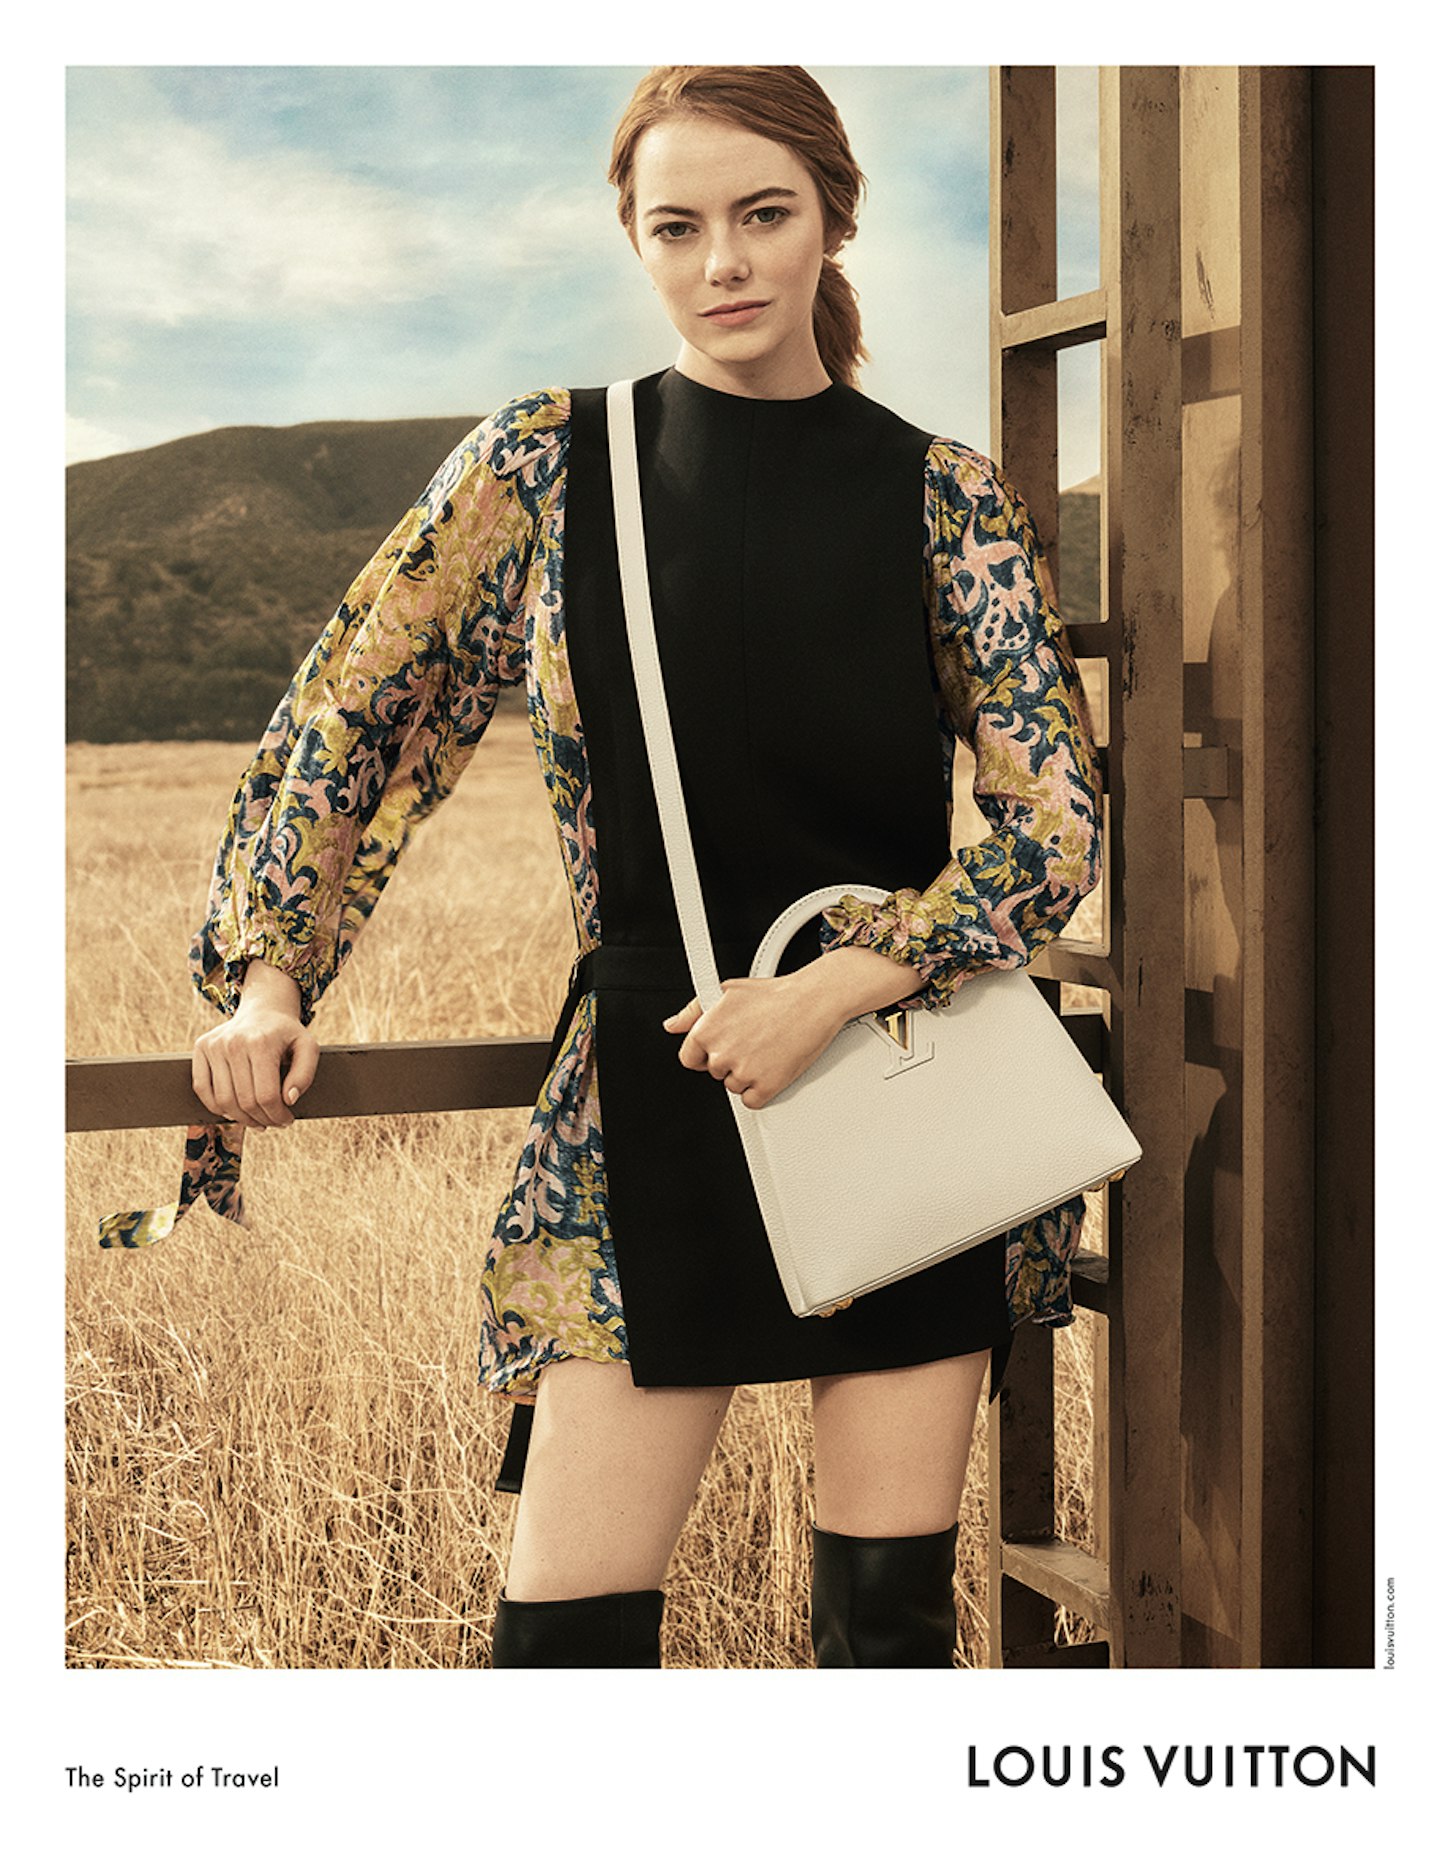 Our Favorite Looks From Emma Stone's Latest Louis Vuitton Travel Campaign -  Glazia